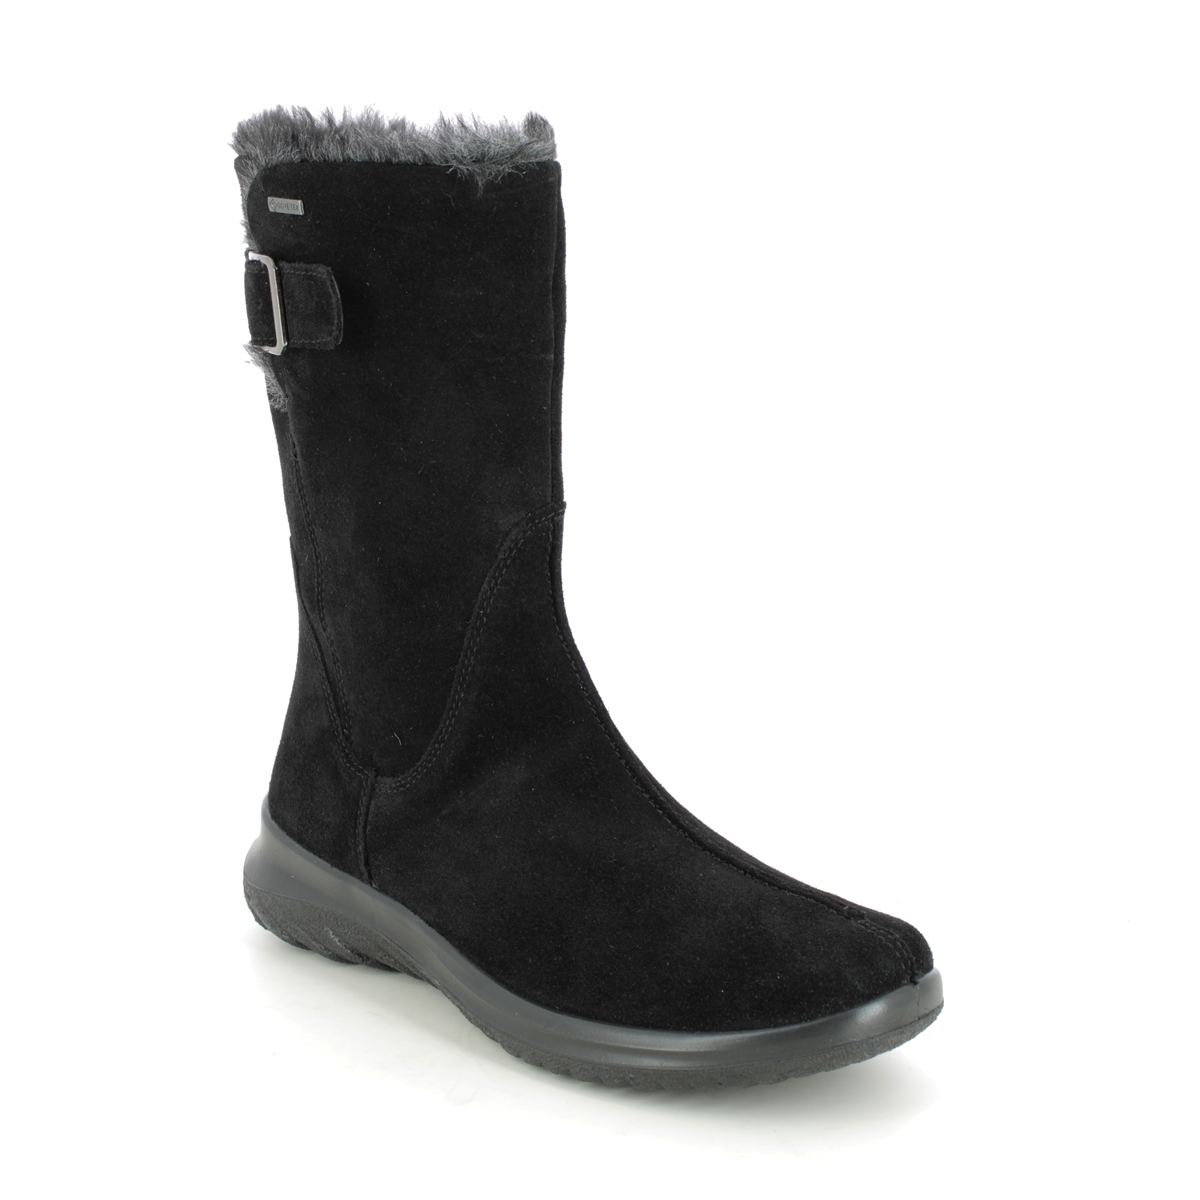 Legero Softboot Gtx Mid Black Suede Womens Mid Calf Boots 2009576-00 In Size 8 In Plain Black Suede